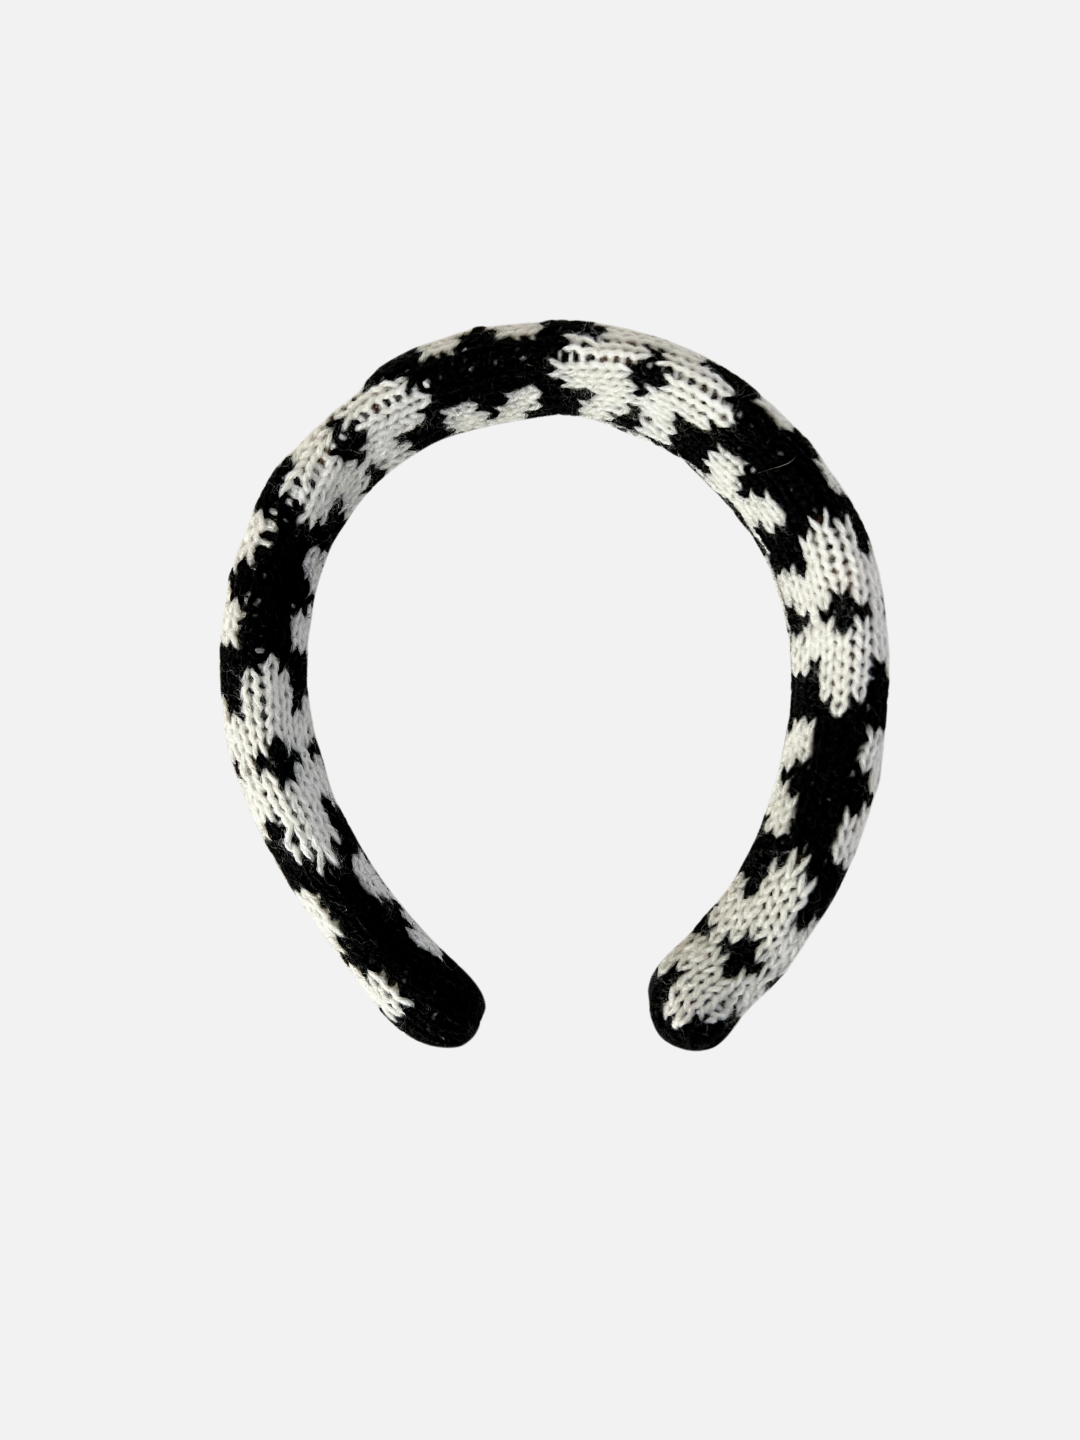 A kids' knitted headband in a pattern of white flowers on a black background